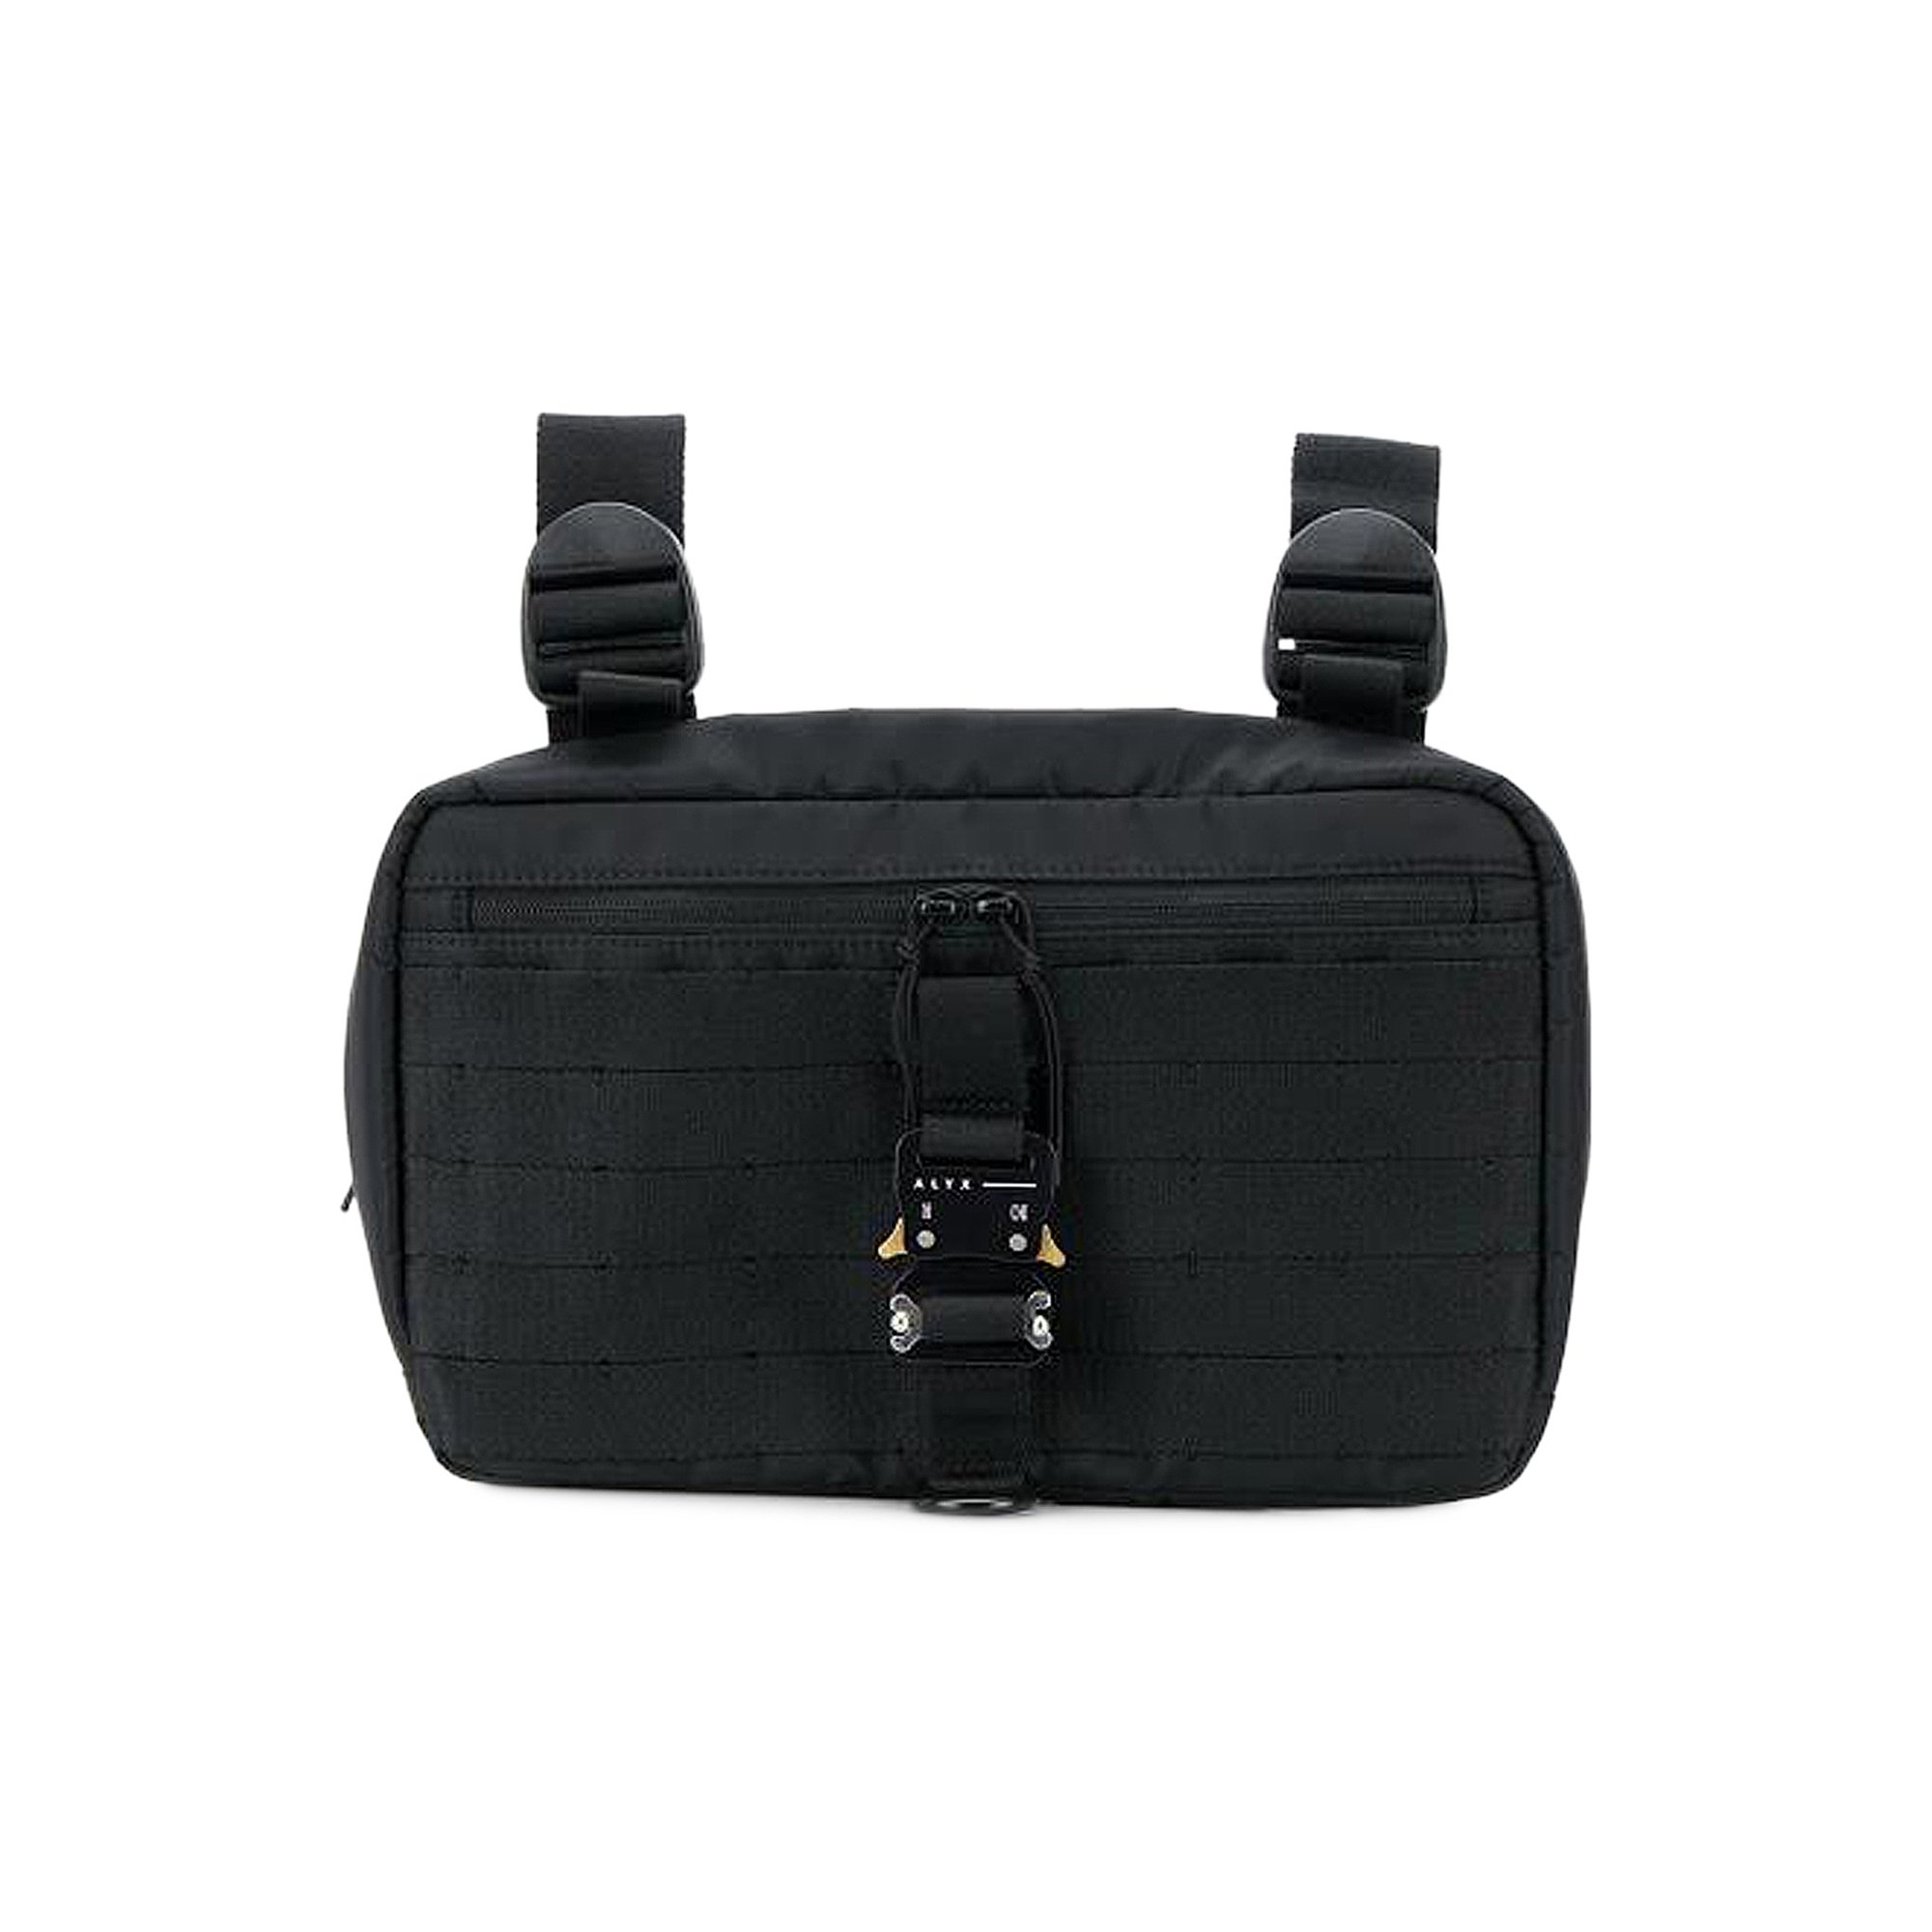 Buy 1017 ALYX 9SM New Chest Rig 'Black' - AAUCB0003FA01 BLK0001 | GOAT